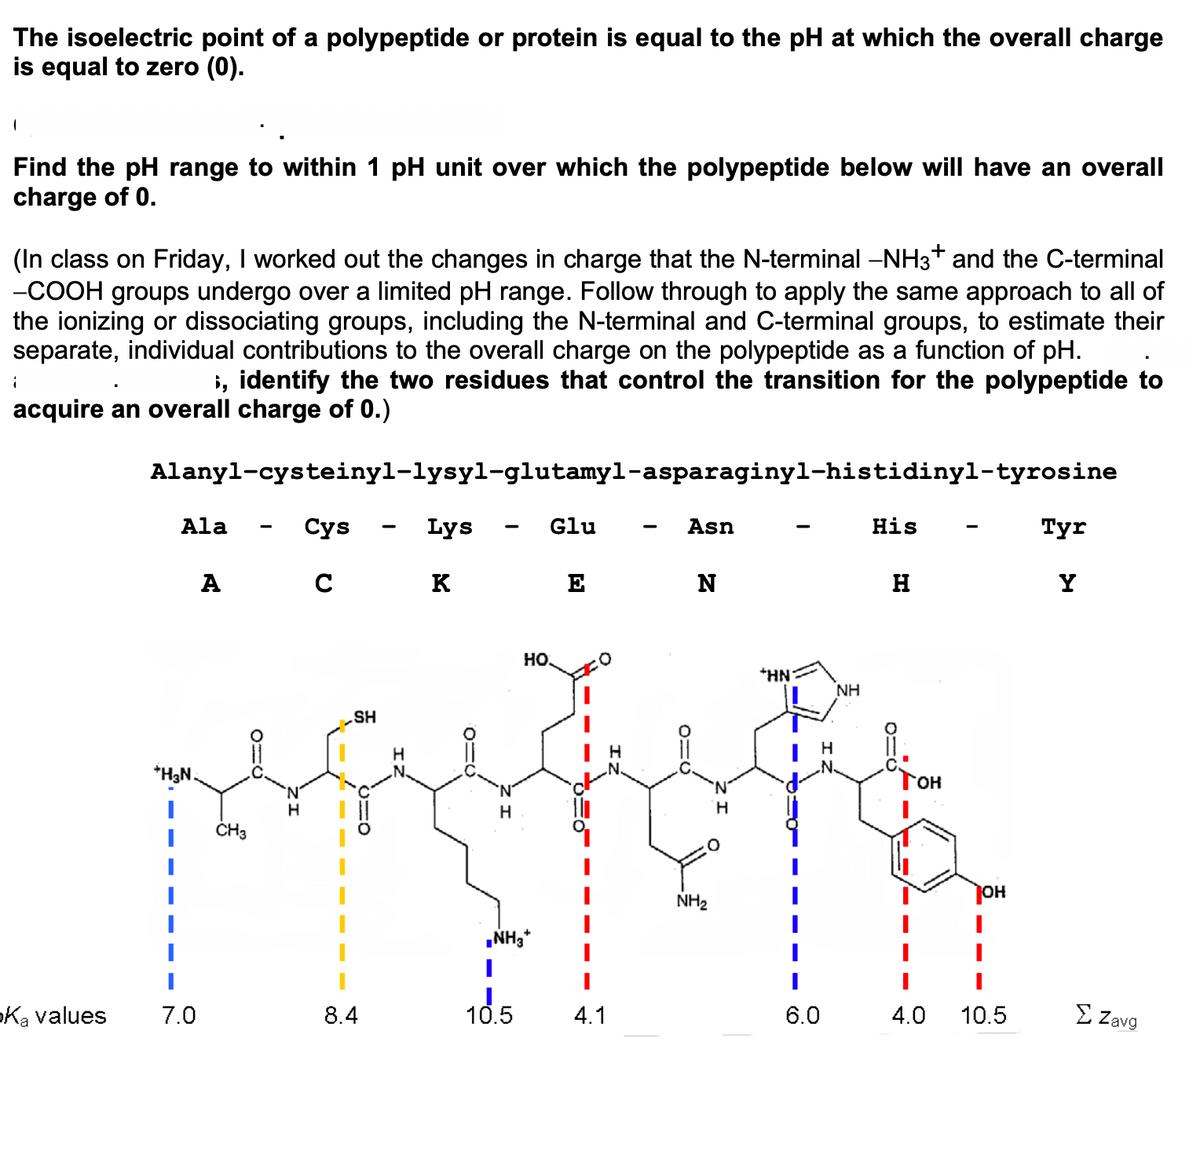 The isoelectric point of a polypeptide or protein is equal to the pH at which the overall charge
is equal to zero (0).
1
i
Find the pH range to within 1 pH unit over which the polypeptide below will have an overall
charge of 0.
(In class on Friday, I worked out the changes in charge that the N-terminal -NH3+ and the C-terminal
-COOH groups undergo over a limited pH range. Follow through to apply the same approach to all of
the ionizing or dissociating groups, including the N-terminal and C-terminal groups, to estimate their
separate, individual contributions to the overall charge on the polypeptide as a function of pH.
6, identify the two residues that control the transition for the polypeptide to
acquire an overall charge of 0.)
Alanyl-cysteinyl-lysyl-glutamyl-asparaginyl-histidinyl-tyrosine
Cys
-
Lys
-
Glu
Ala
-
A C
*H3N
CH3
.SH
H
K
H
HO.
E
-
Asn
His
-
Tyr
N
H
Y
O=0
■NH3*
NH₂
ΤΗΝ
NH
H
Тон
JOH
oka values
7.0
8.4
10.5
4.1
6.0
4.0 10.5
ΣZavg